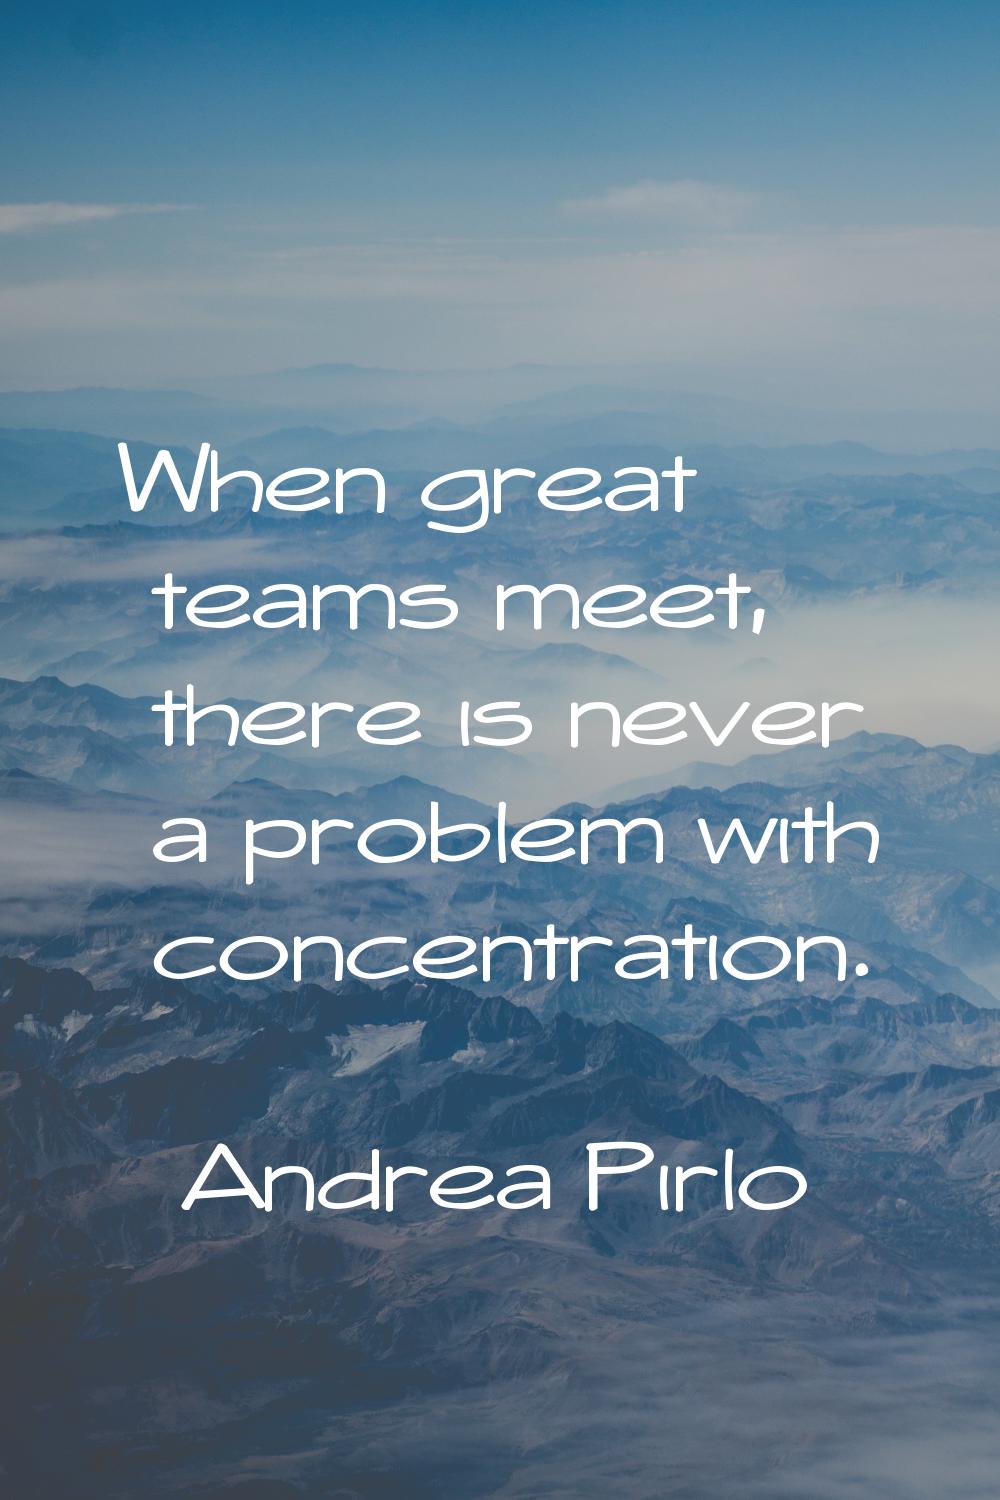 When great teams meet, there is never a problem with concentration.